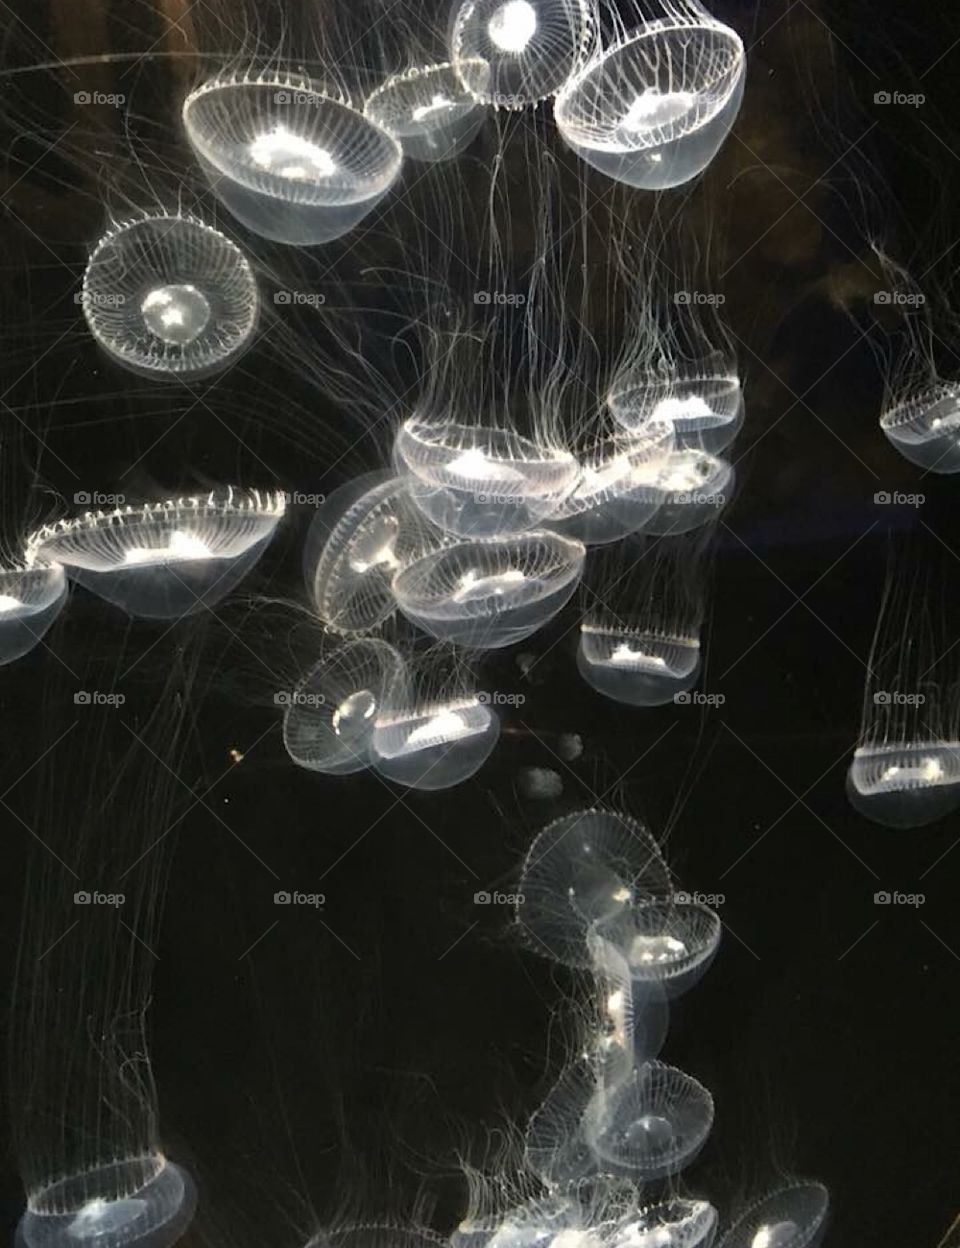 Glowing moon jellies from the Pacific Ocean.